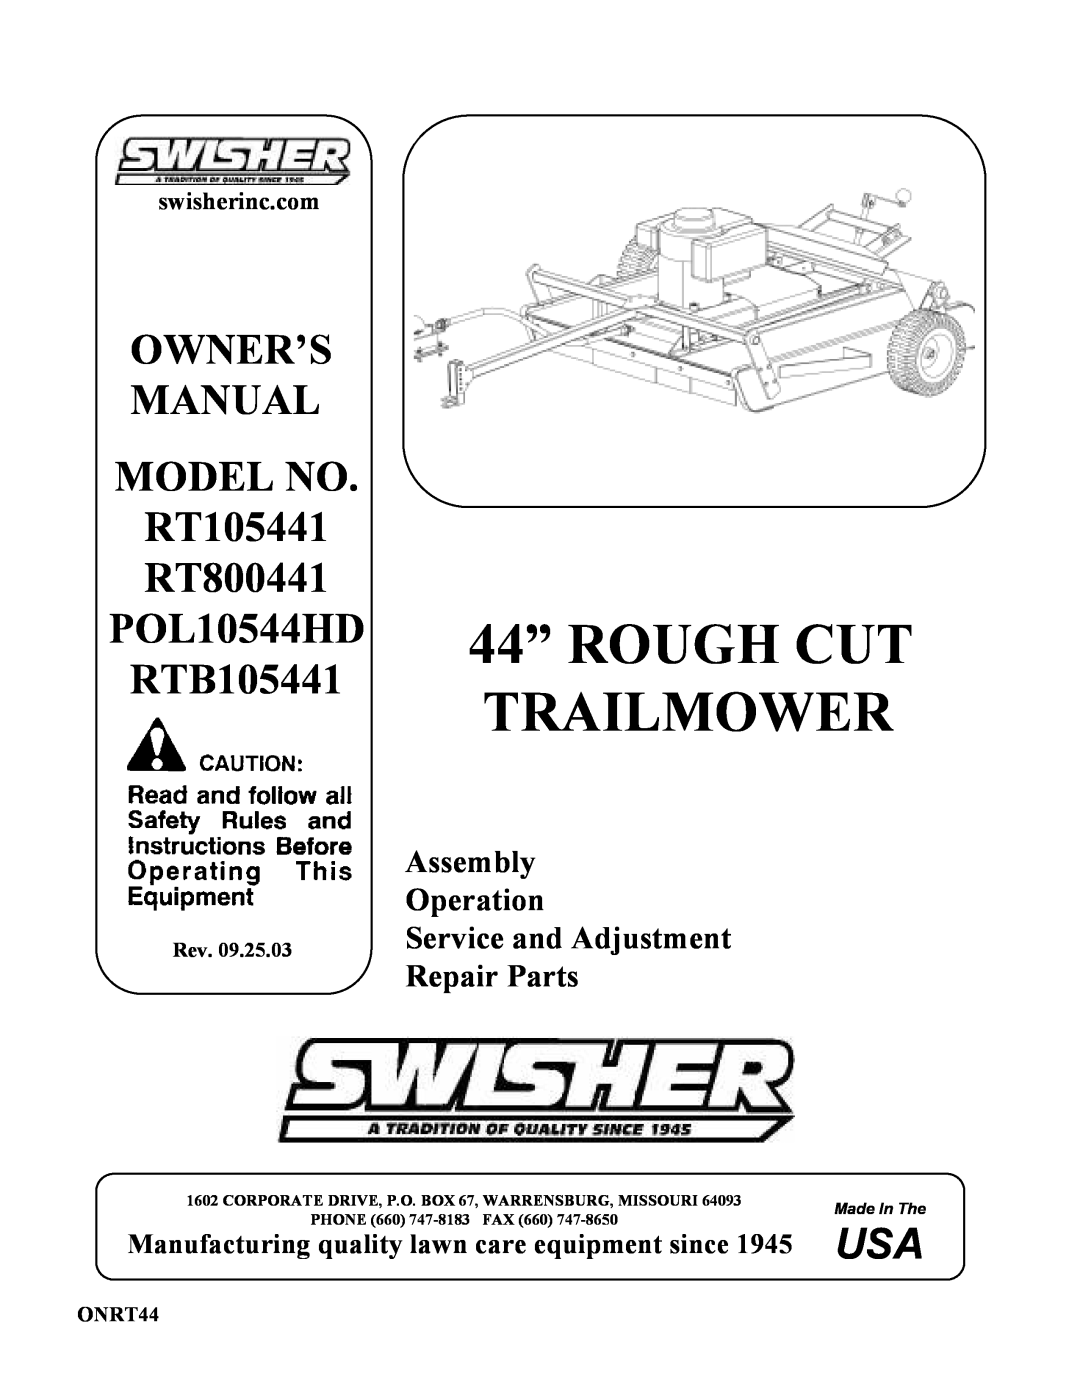 Swisher RT800441 owner manual Manufacturing quality lawn care equipment since 1945 USA, swisherinc.com, Assembly, ONRT44 